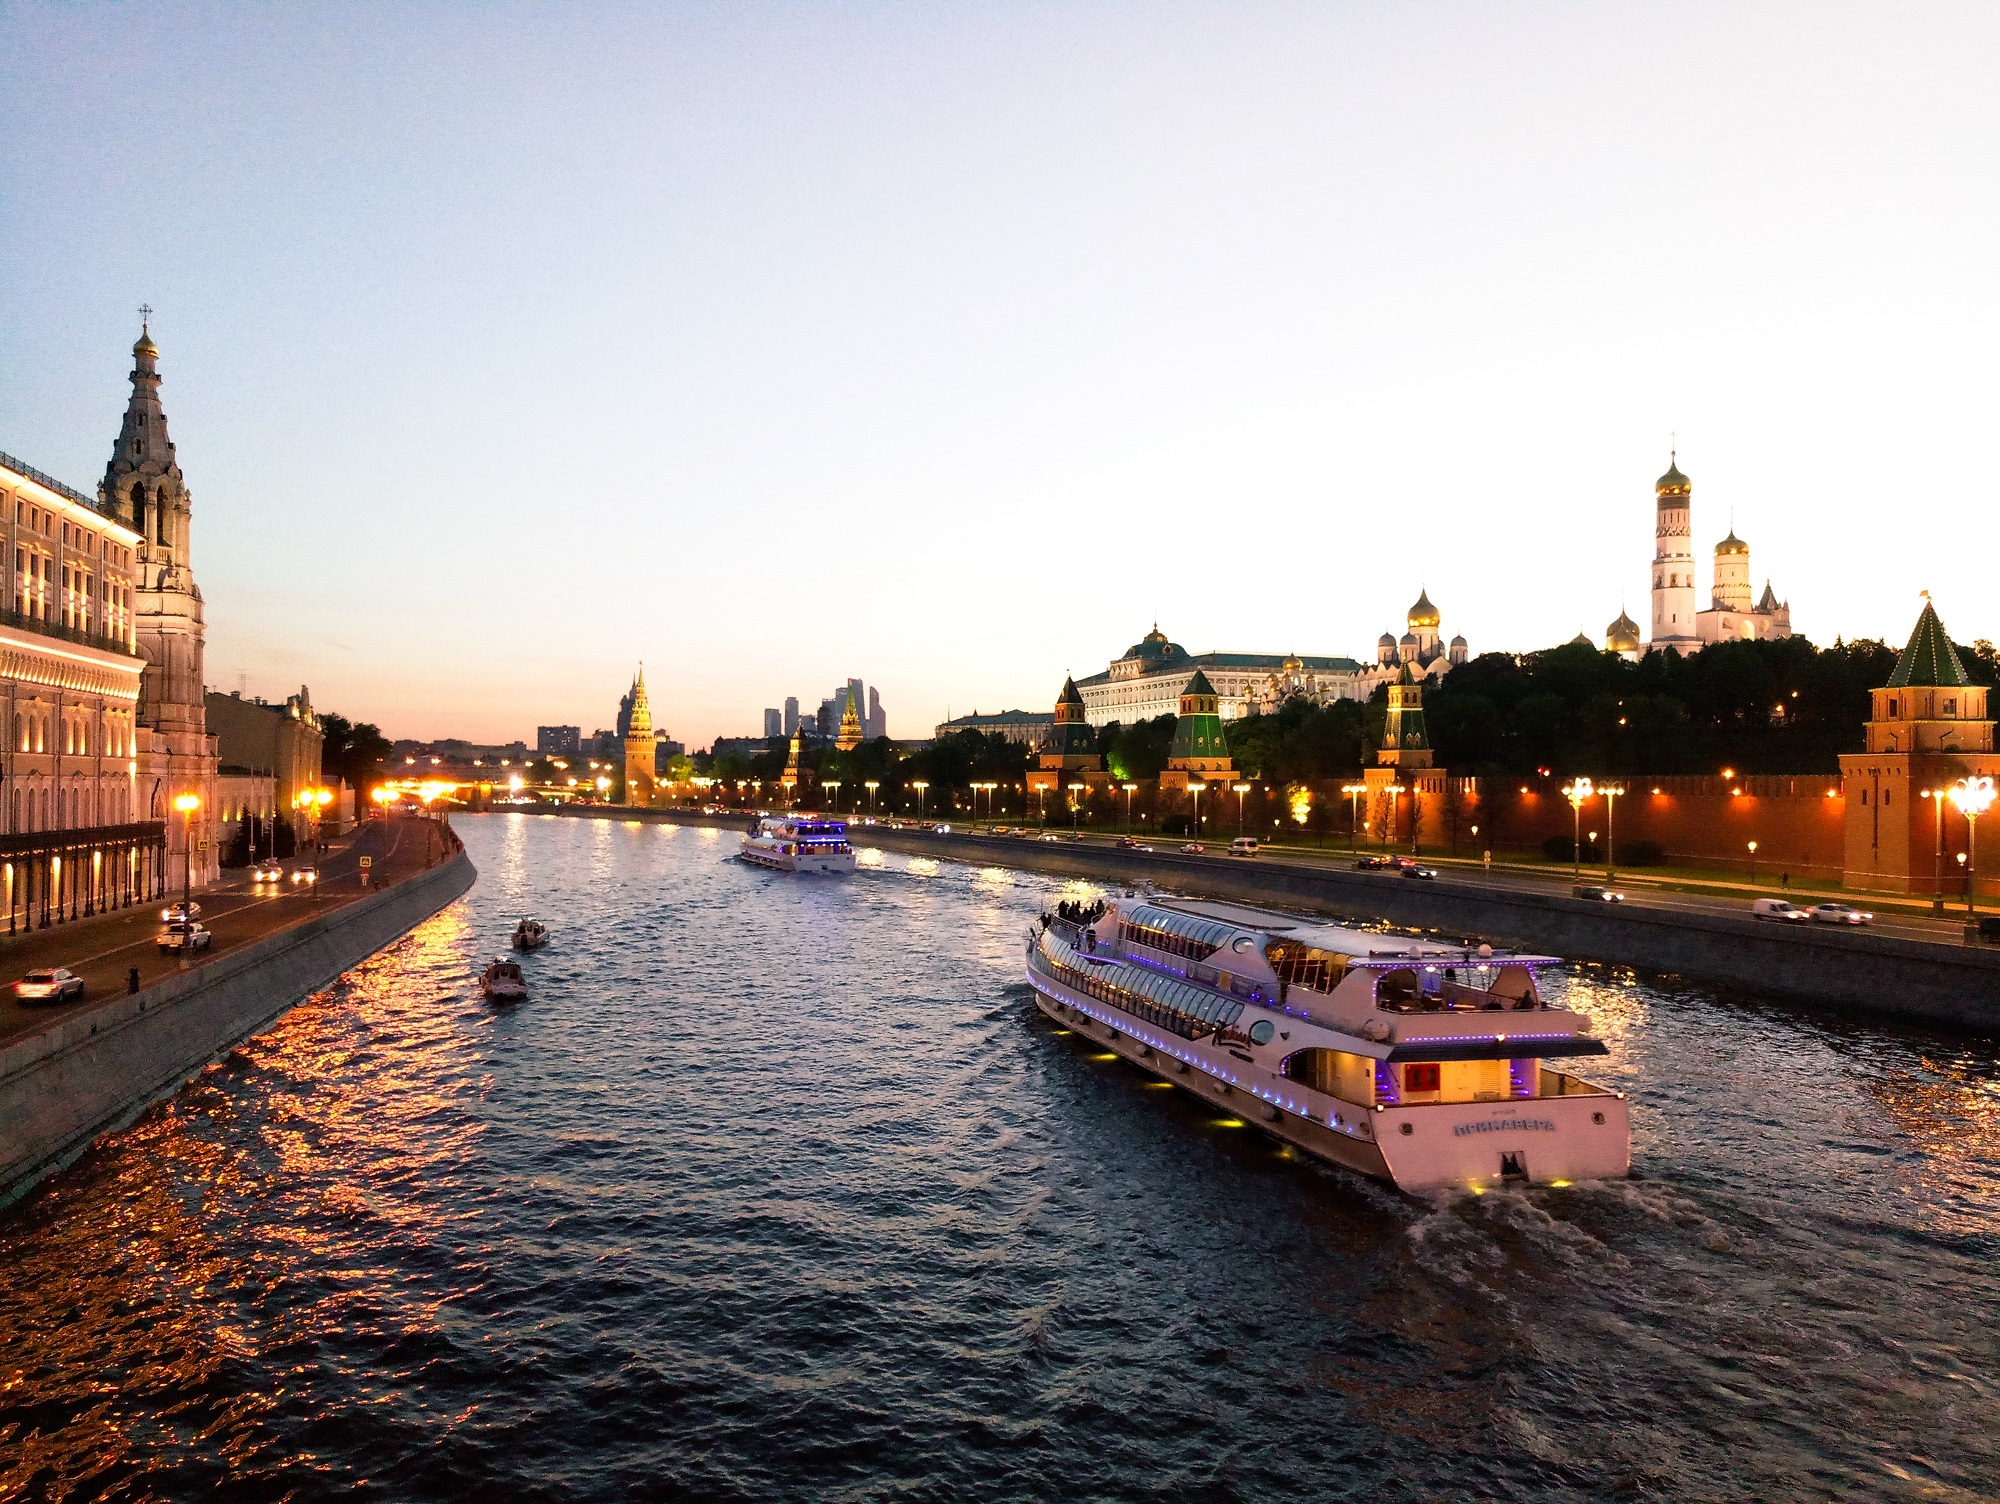 Small river cruise, sunset, heritage buildings